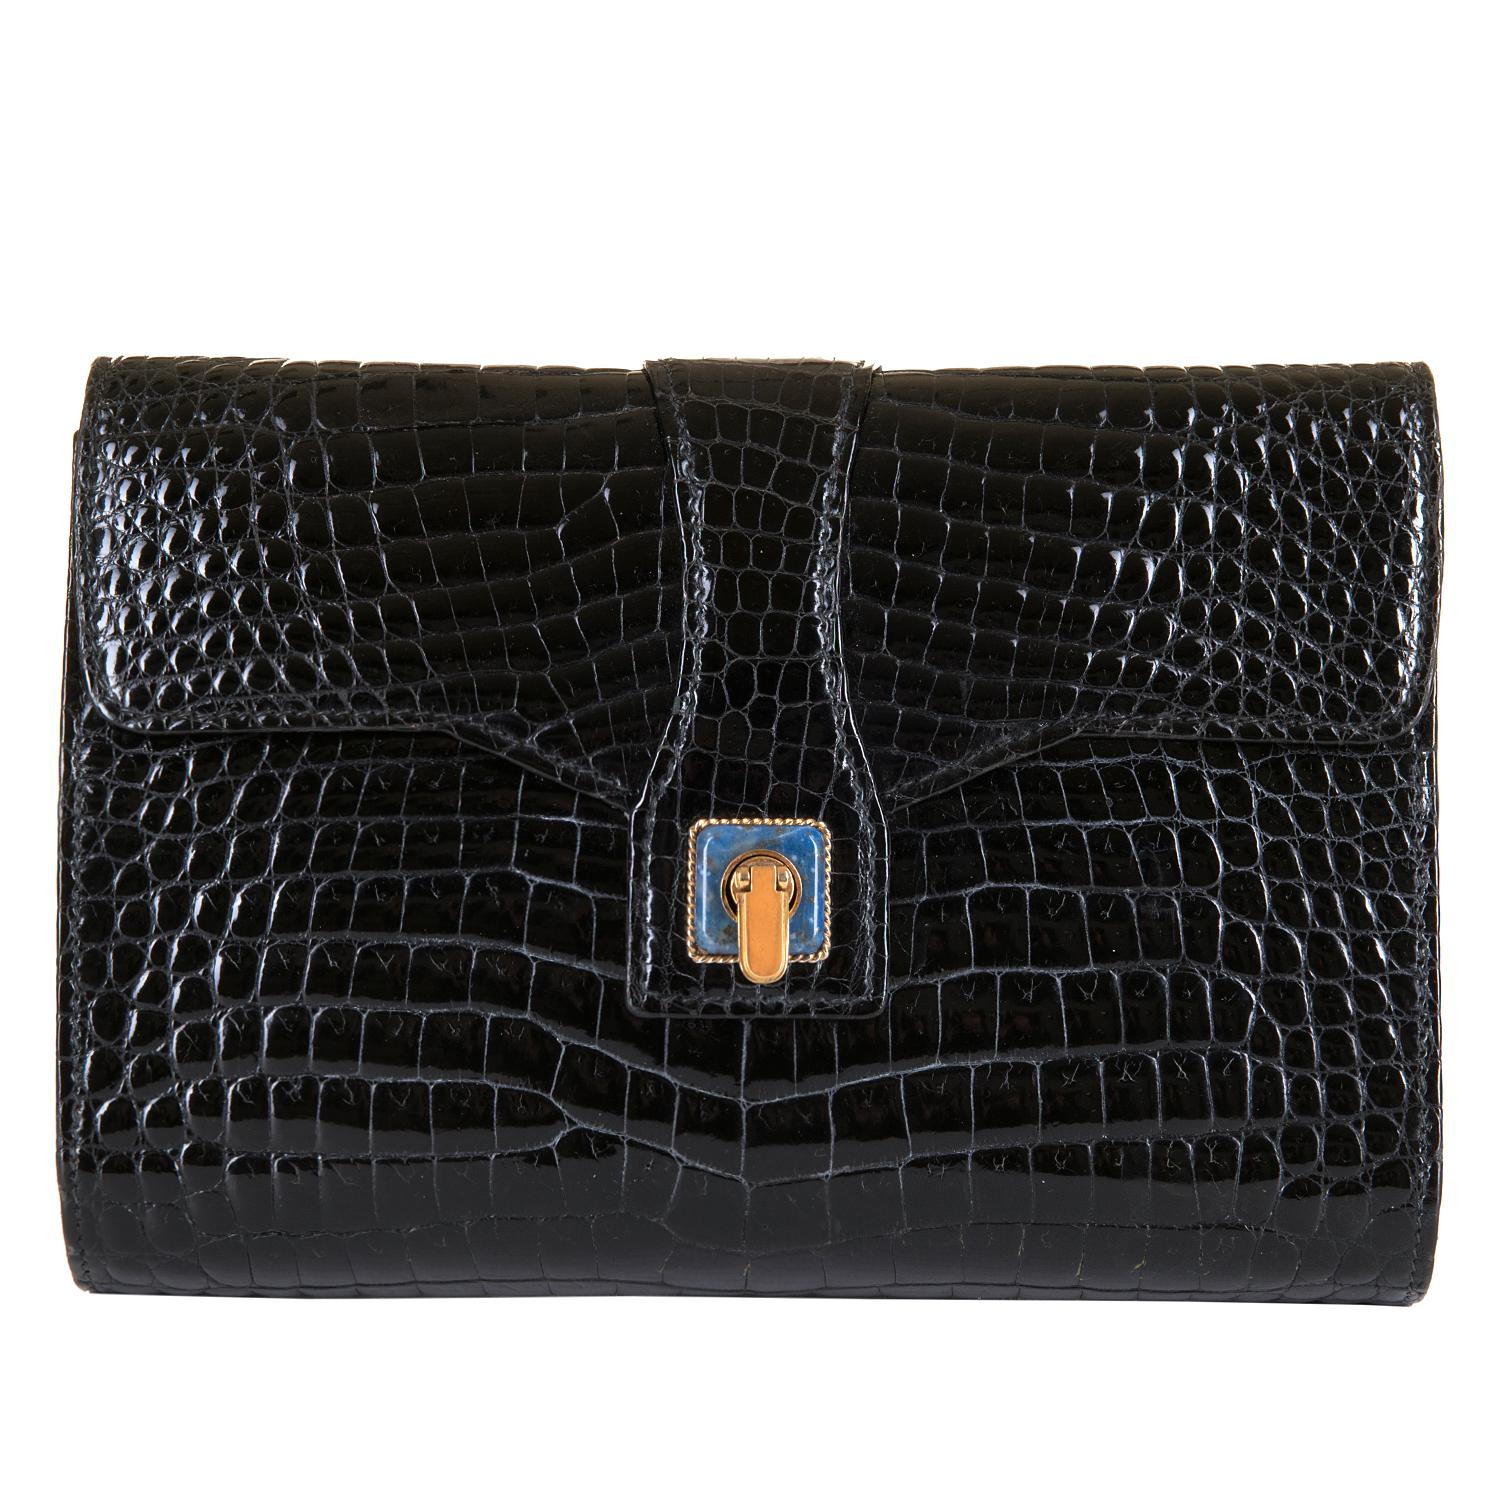 In pristine condition, this Gucci Black Crocodile 22cm Clutch is the epitome of luxury & style. Made in circa 1980, the gold clasp is embellished with semi-precious lapis Lazuli. This high quality bag has a timeless quality that will become a real